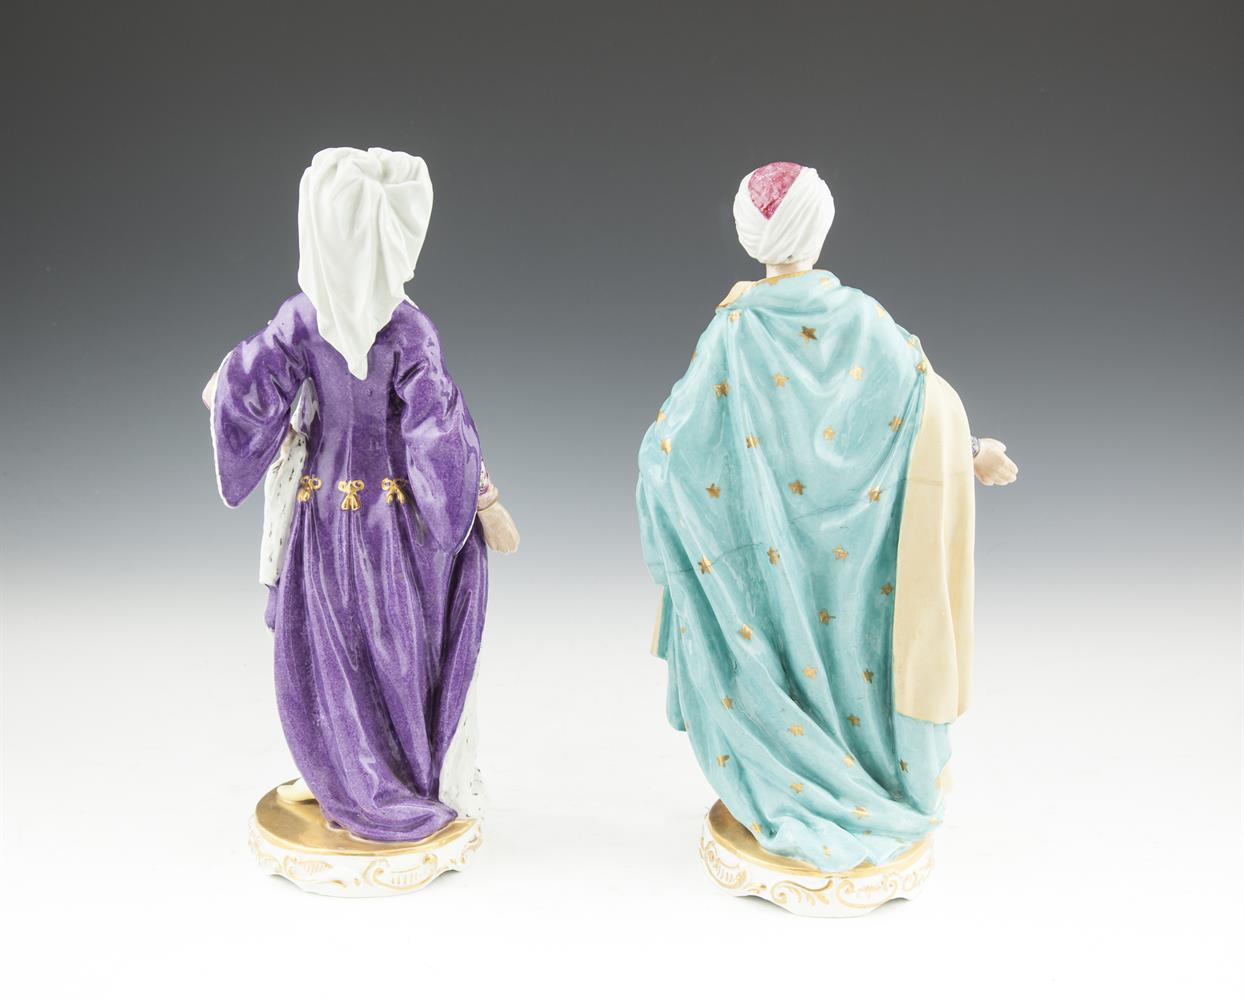 A PAIR OF ENGLISH EARLY 19TH CENTURY PORCELAIN FIGURINES MODELLED AS A SULTAN & SULTANA, each figure - Image 2 of 2